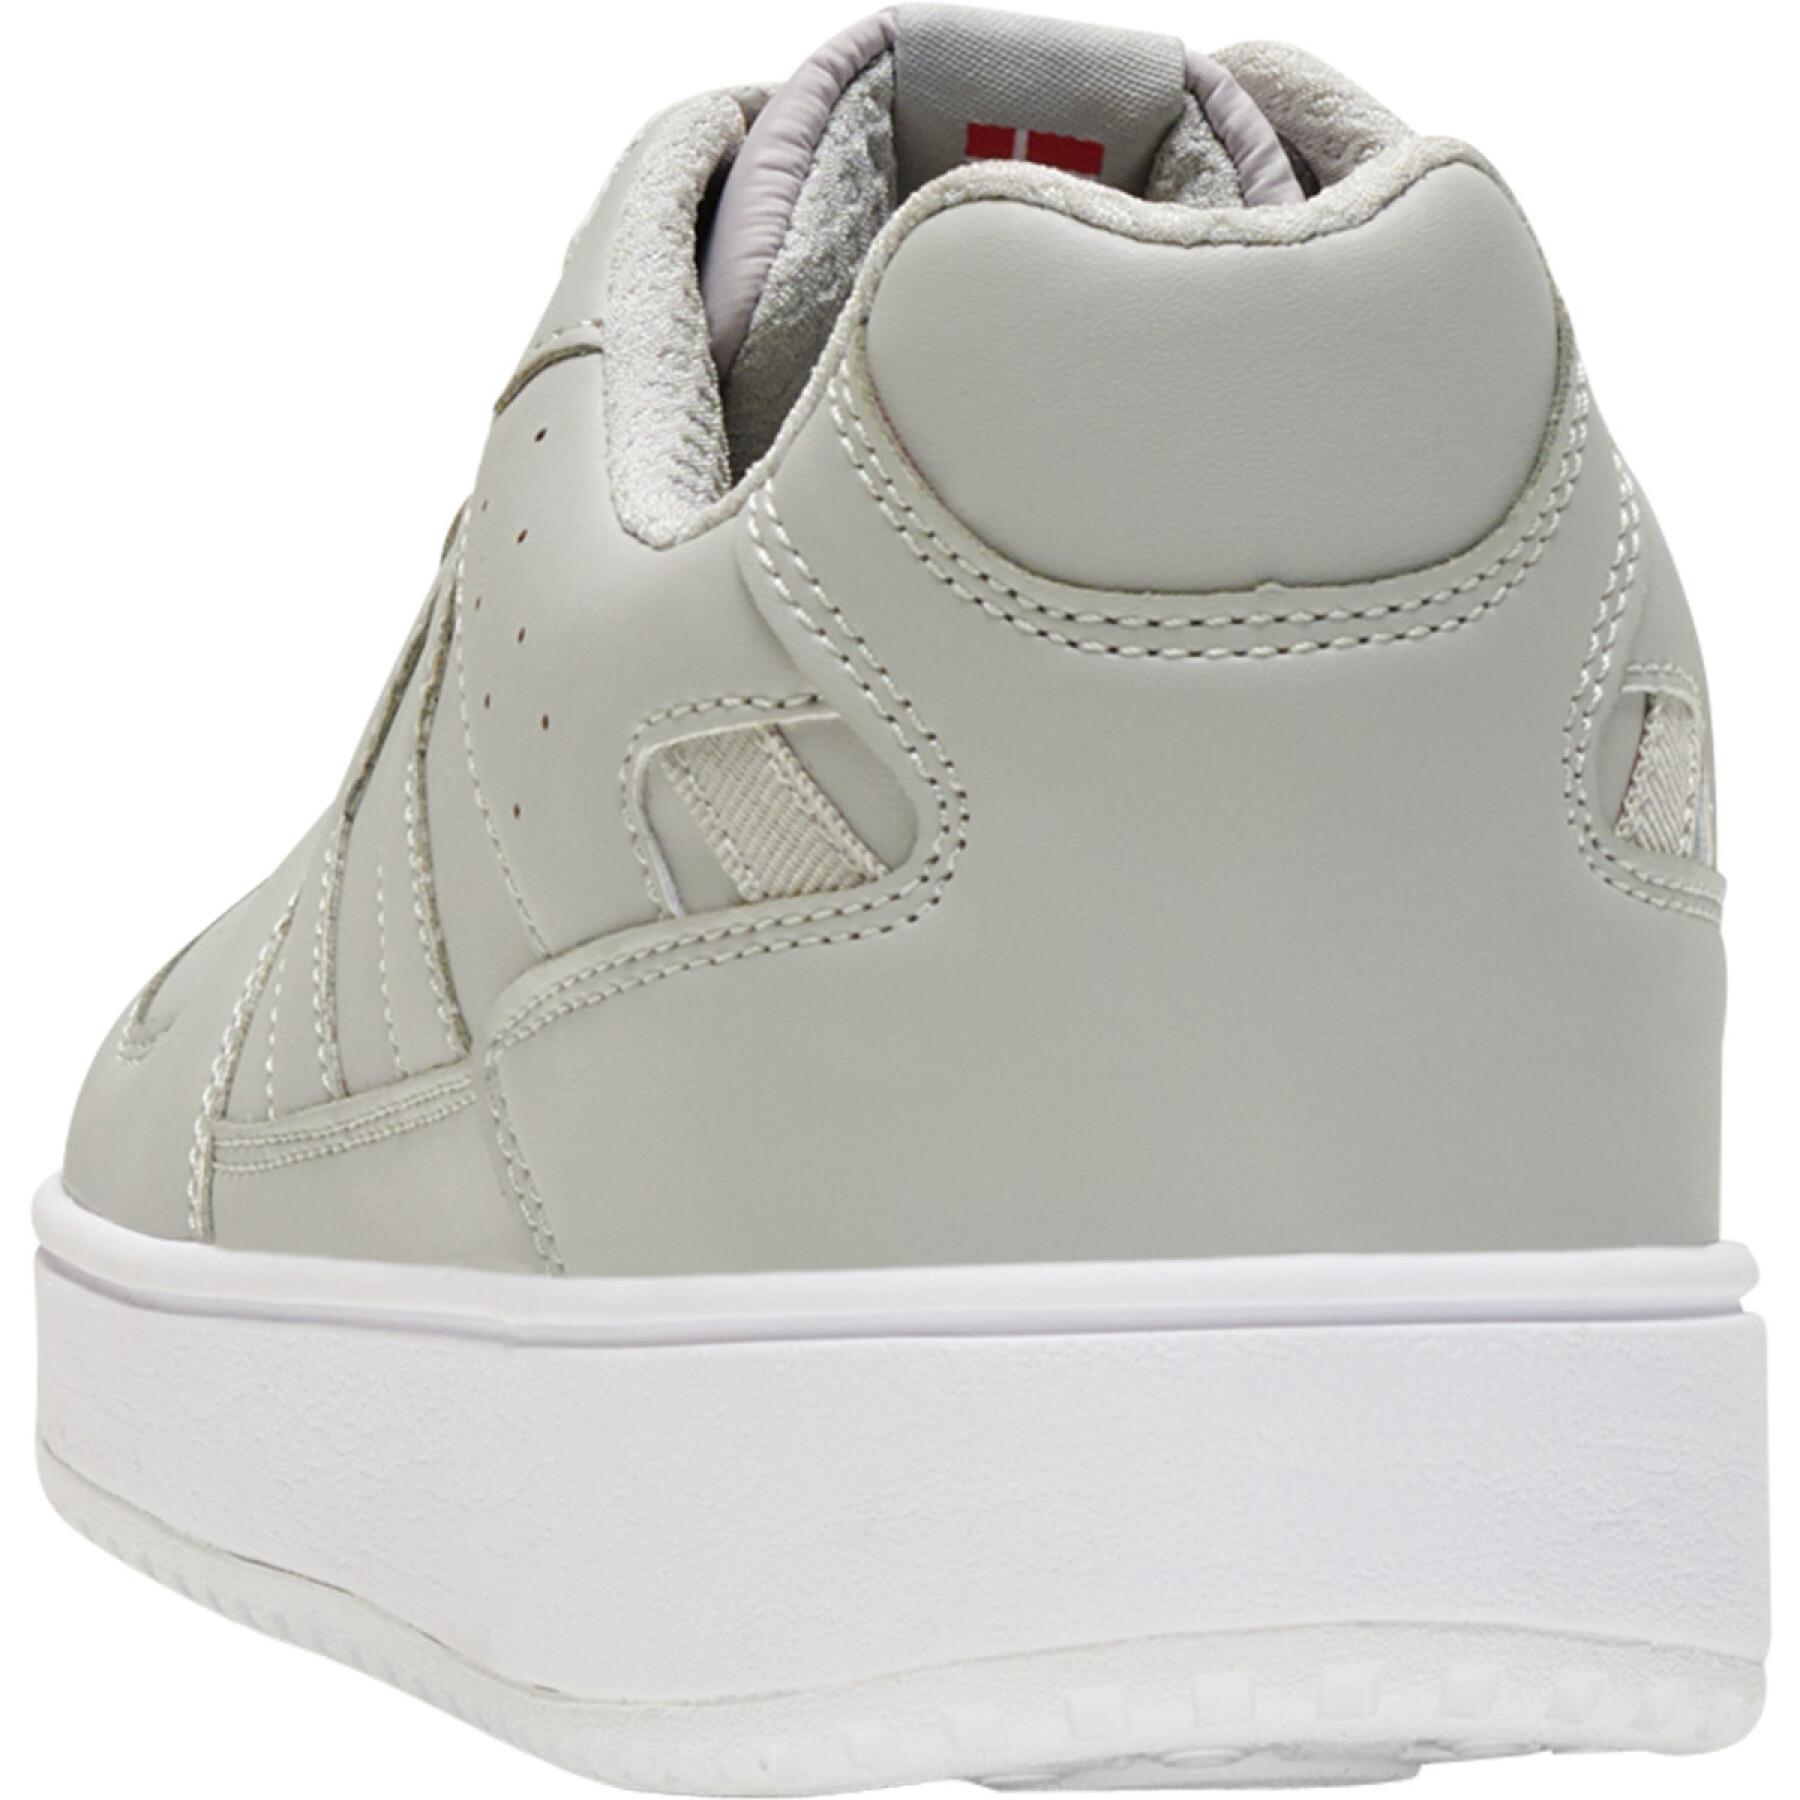 Chaussures indoor Hummel st power play